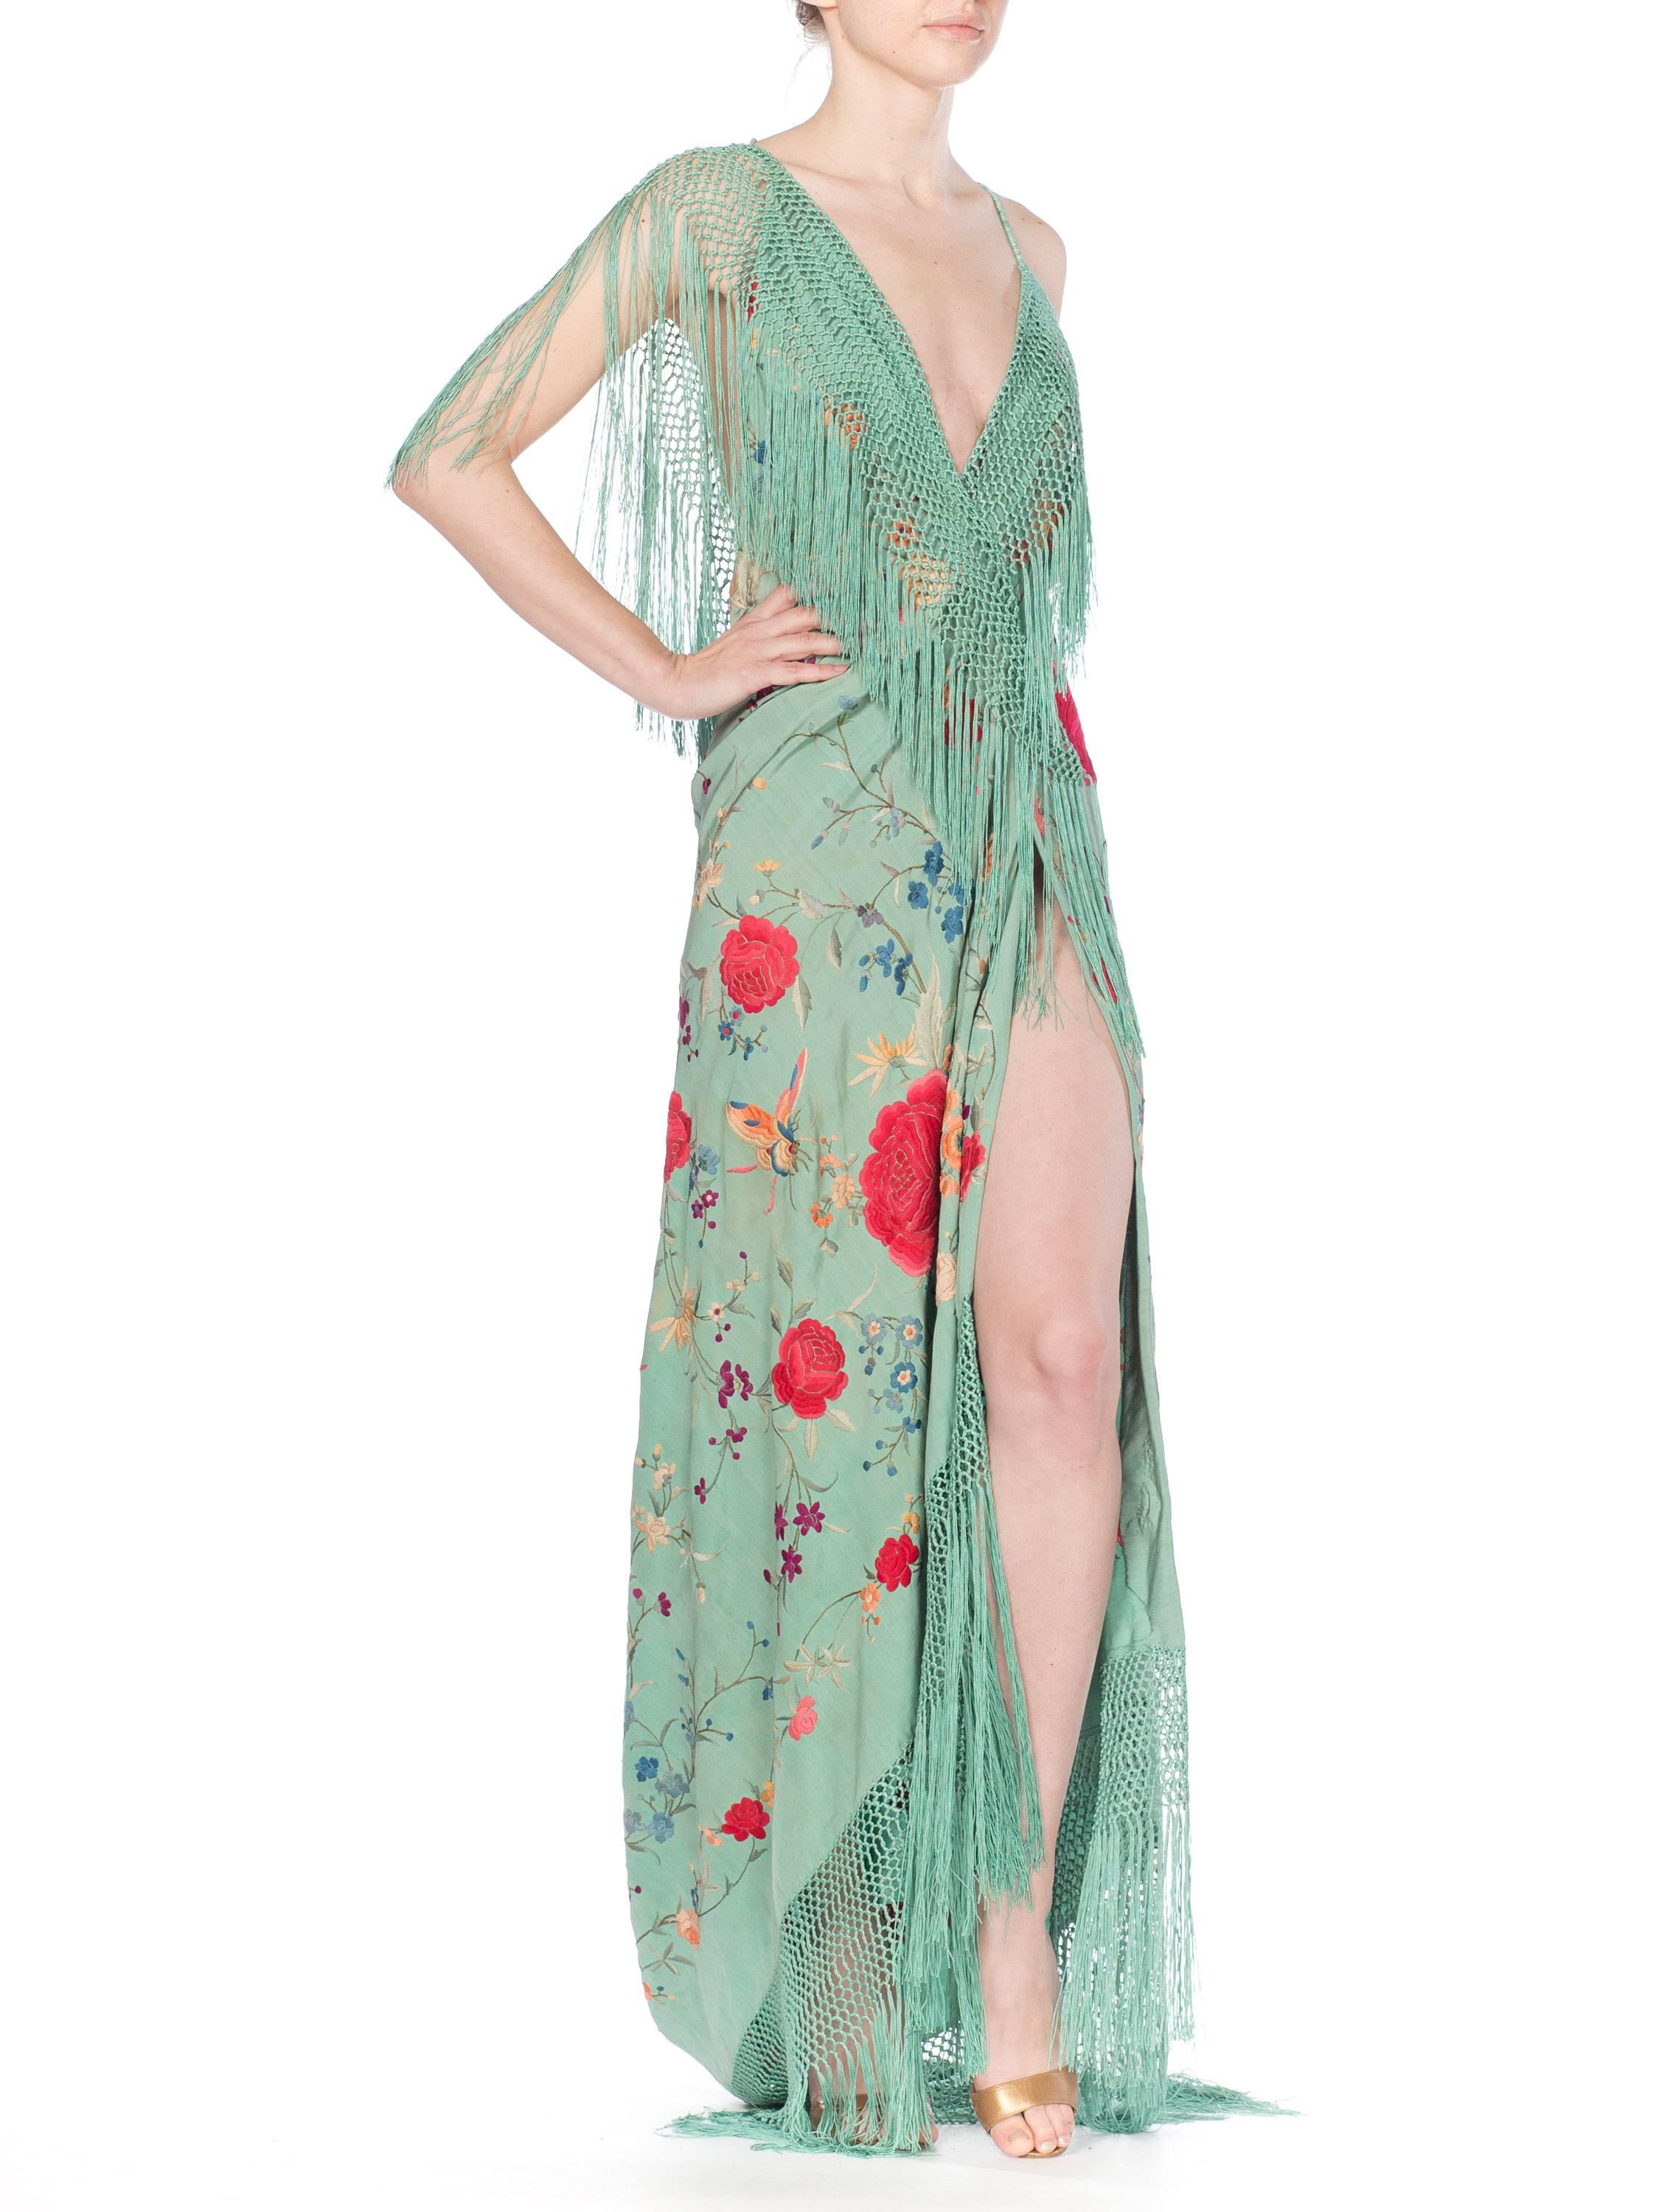 This gown is made from an antique piano shawl in the most beautiful Chinese Jade green with wonderful flowers and butterflies embroidered all by hand. The gown has a high slit and low back with a train. The train can be picked up and latched to a